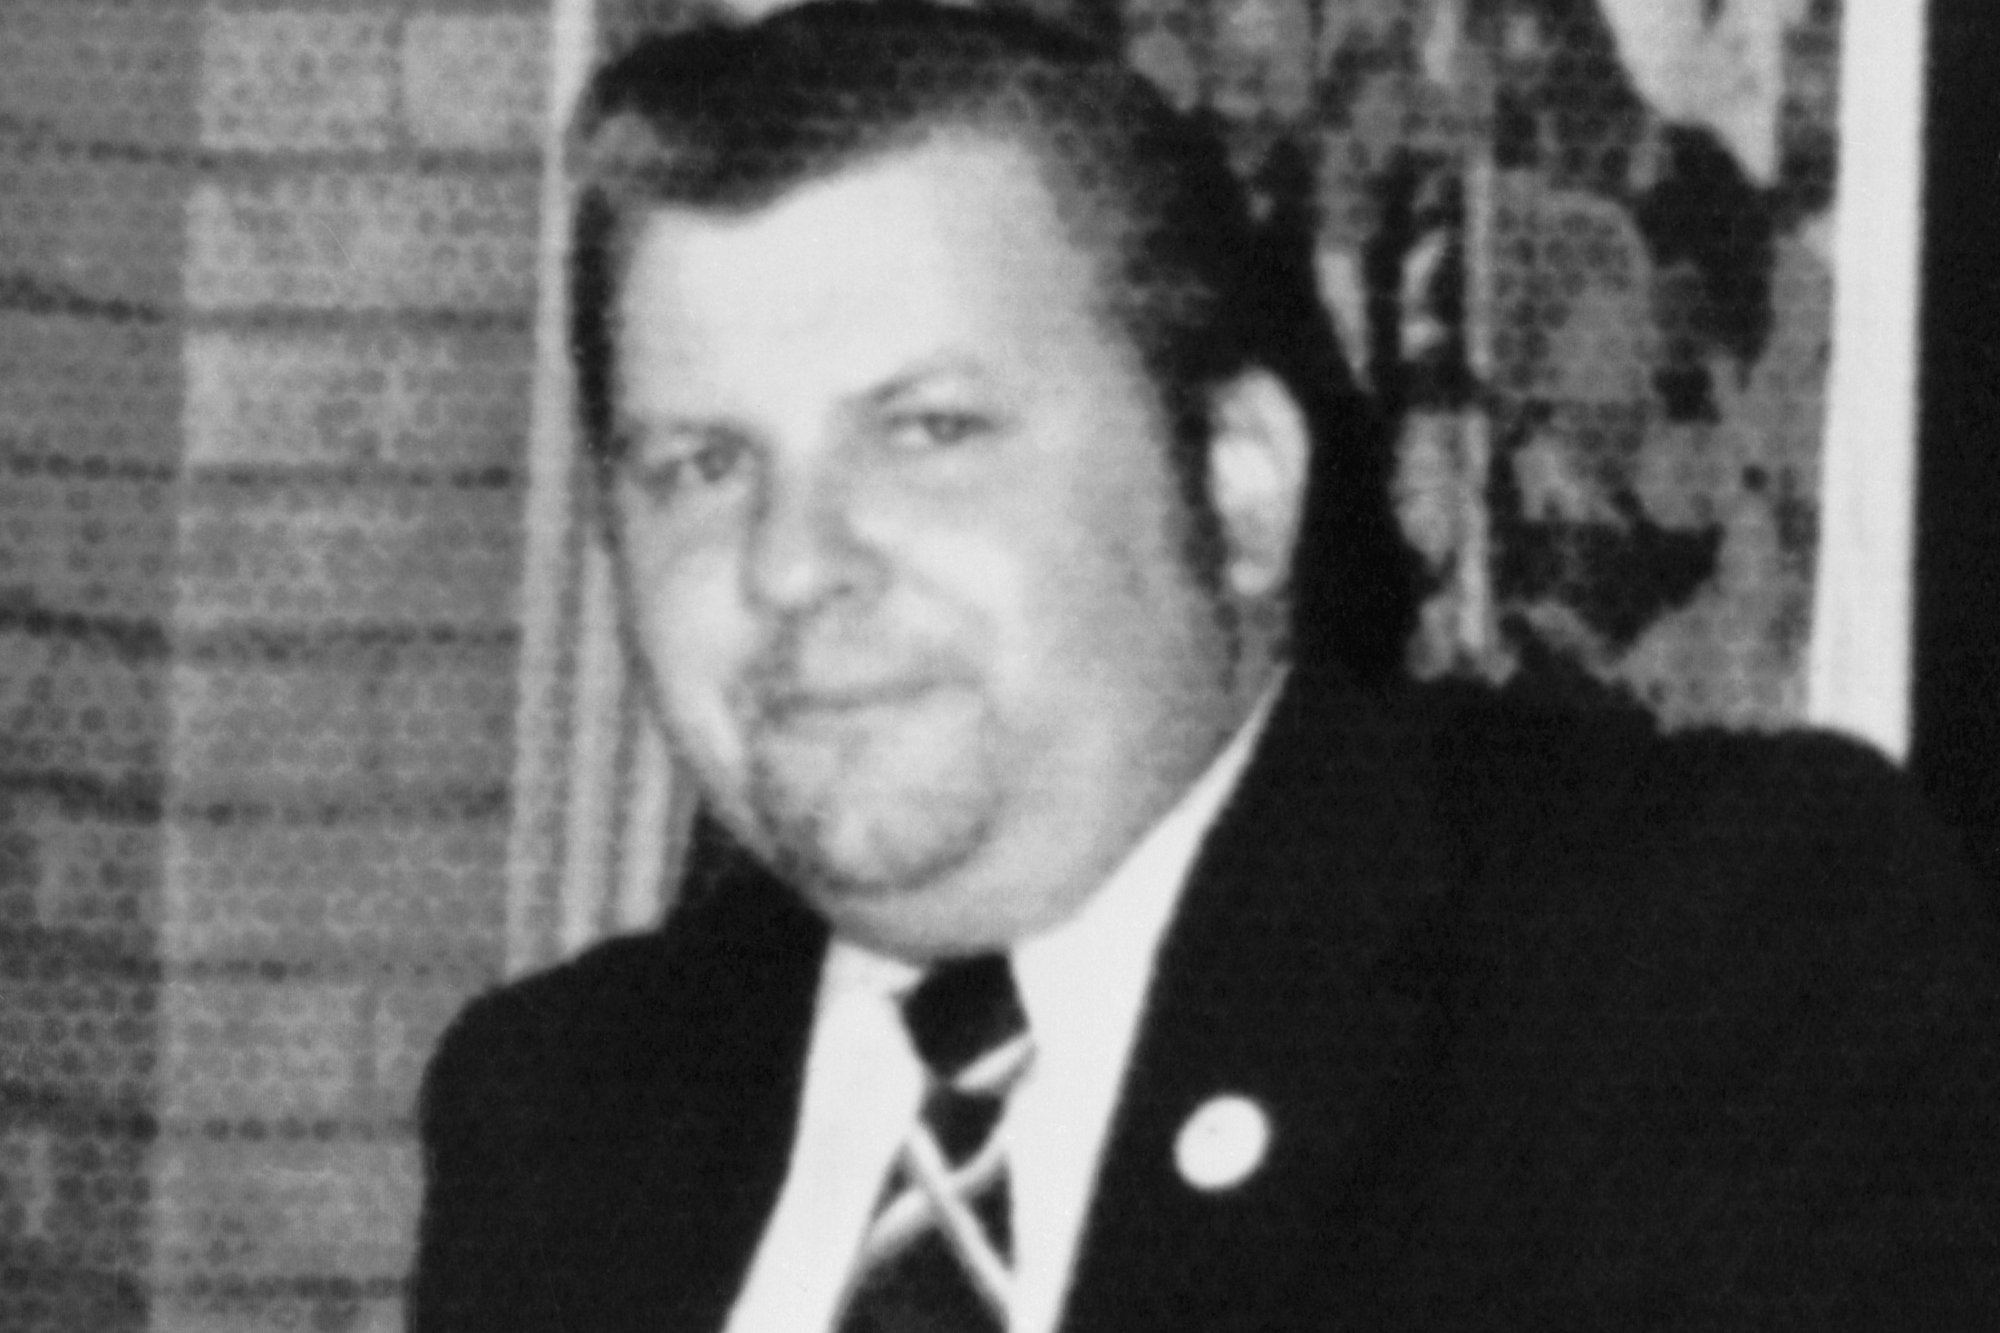 John Wayne Gacy, who had 29 bodies at his residence. He's wearing a suit and tie in a black-and-white photograph looking at the camera.